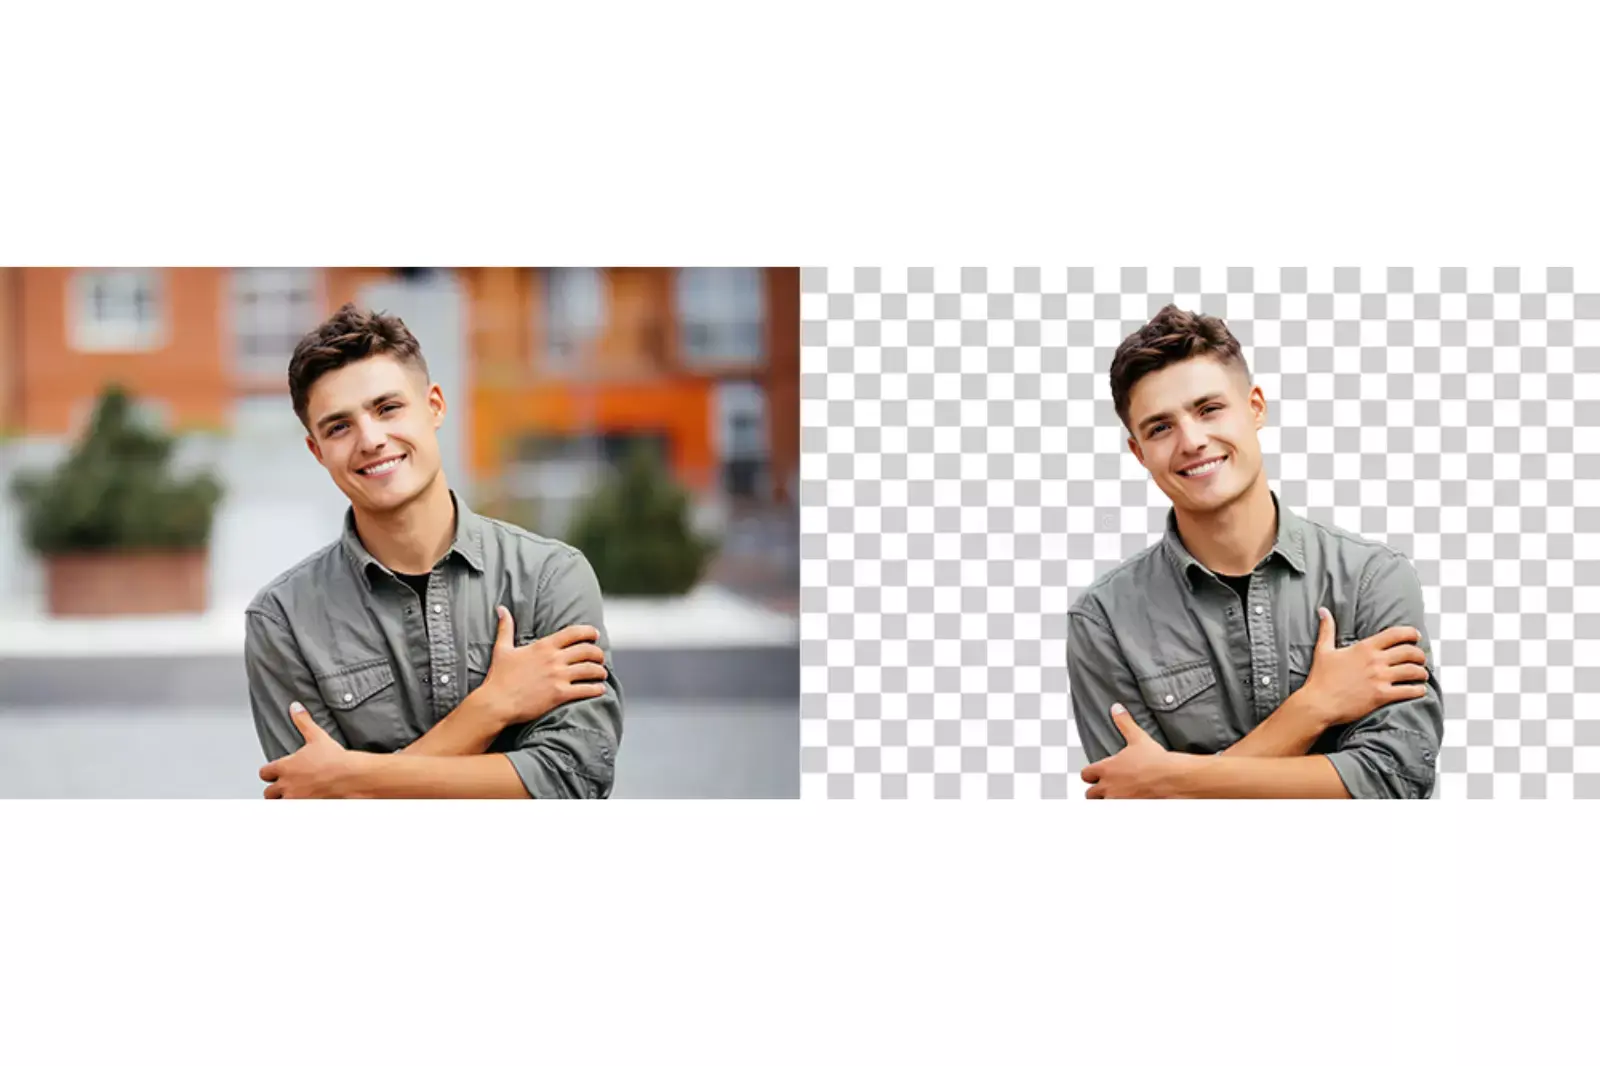 Why is Automatic Background Removal important